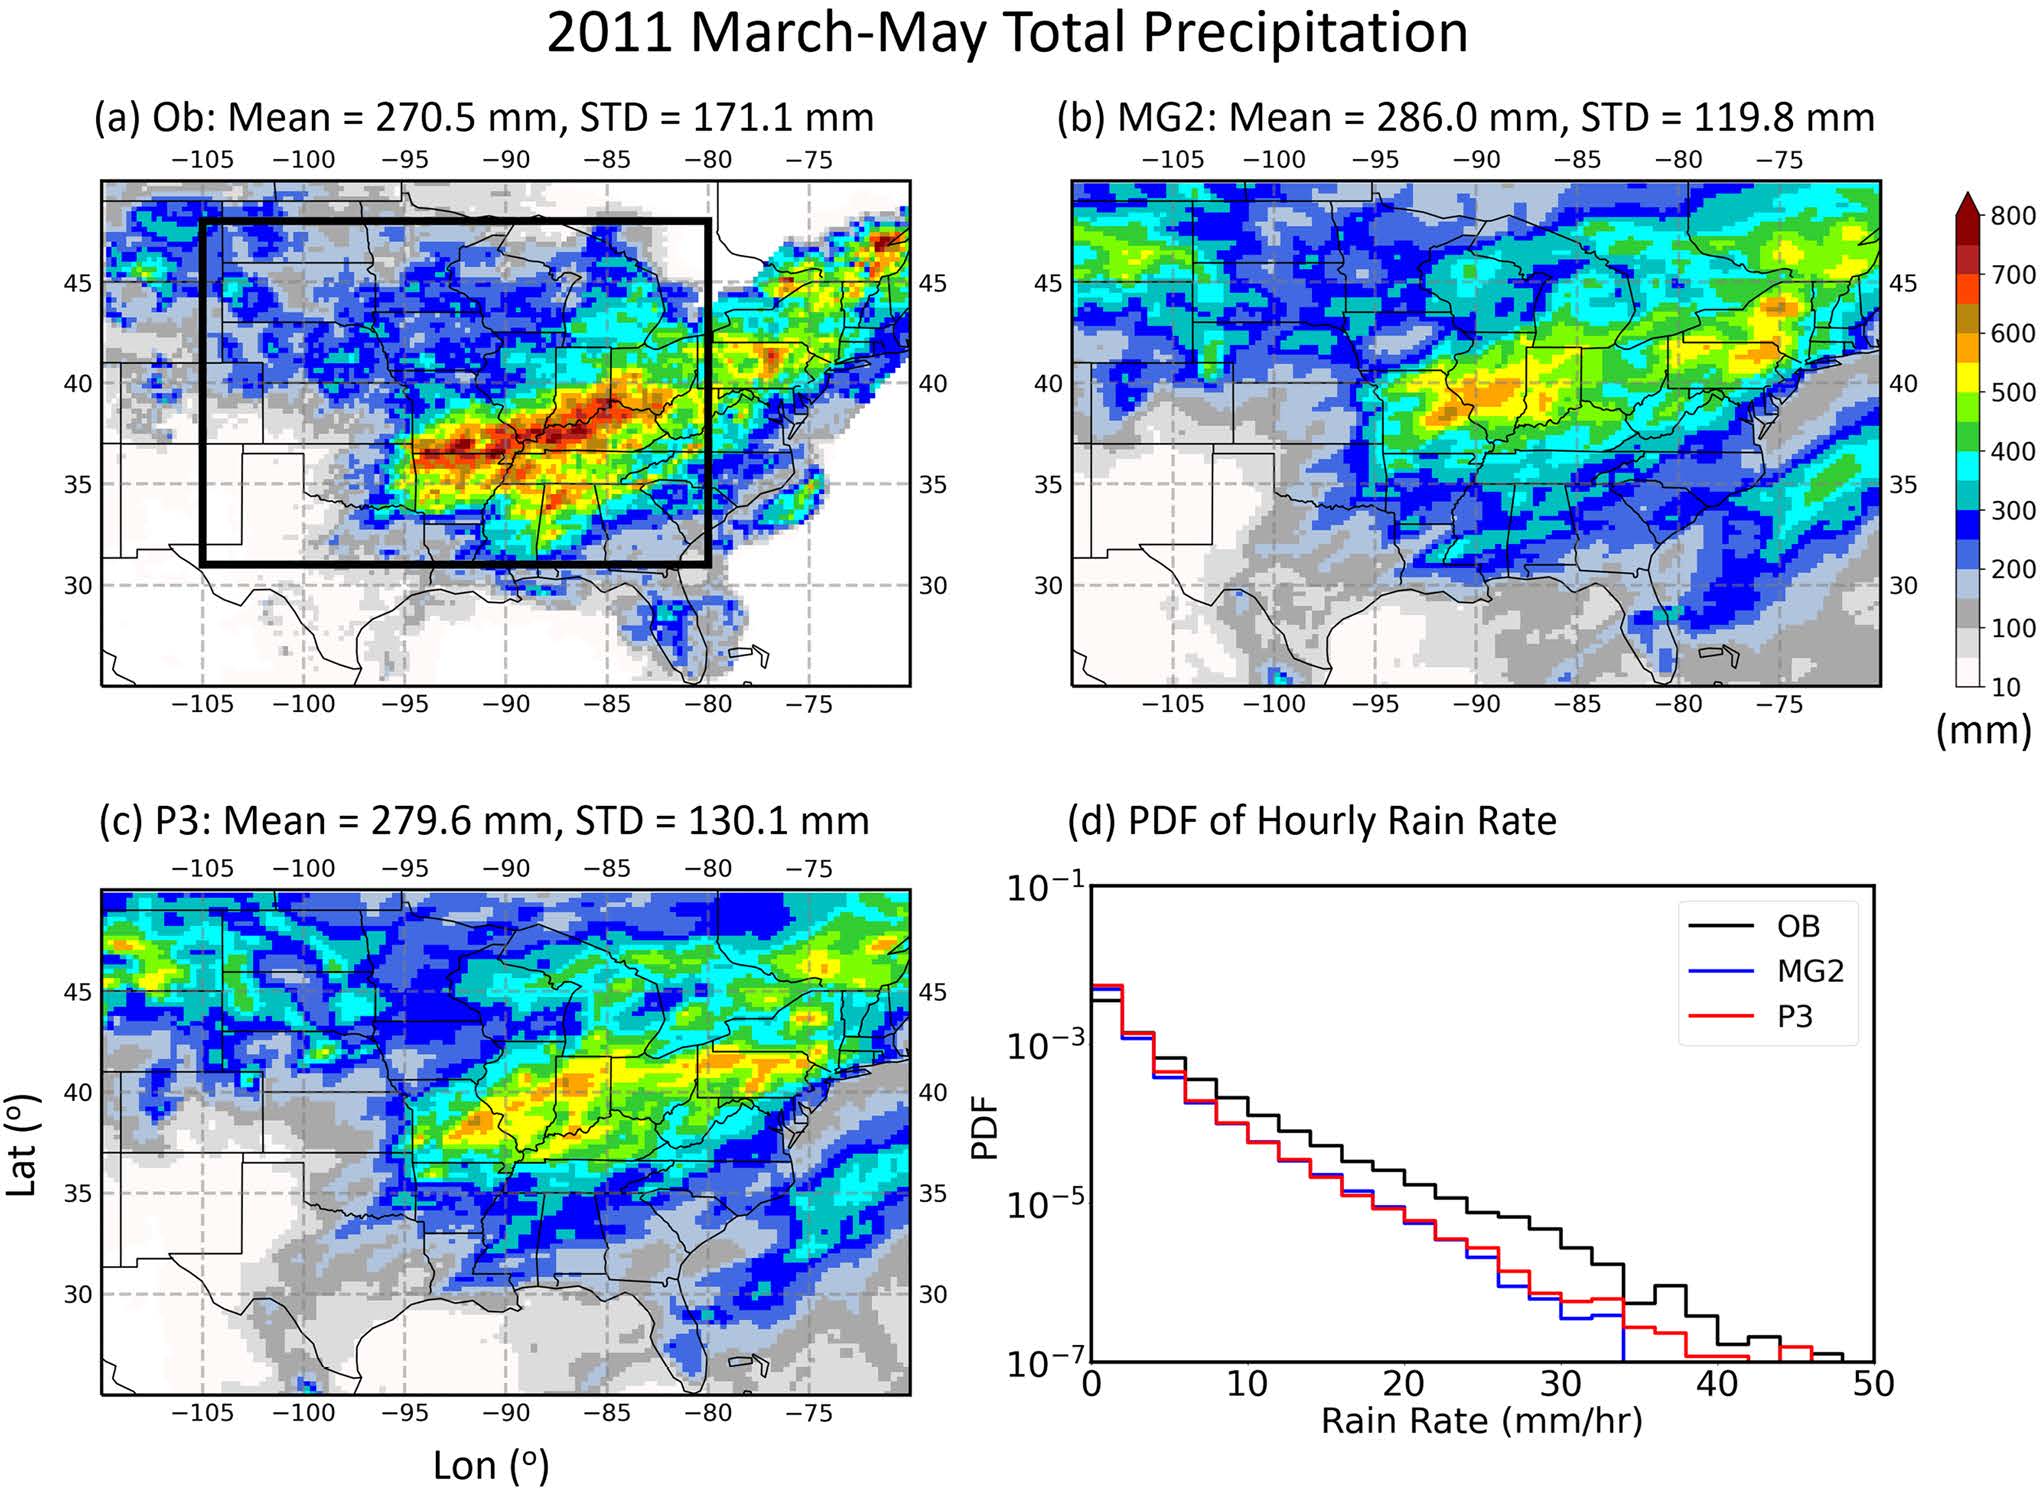 Comparison of 2011 March-May accumulated total precipitation